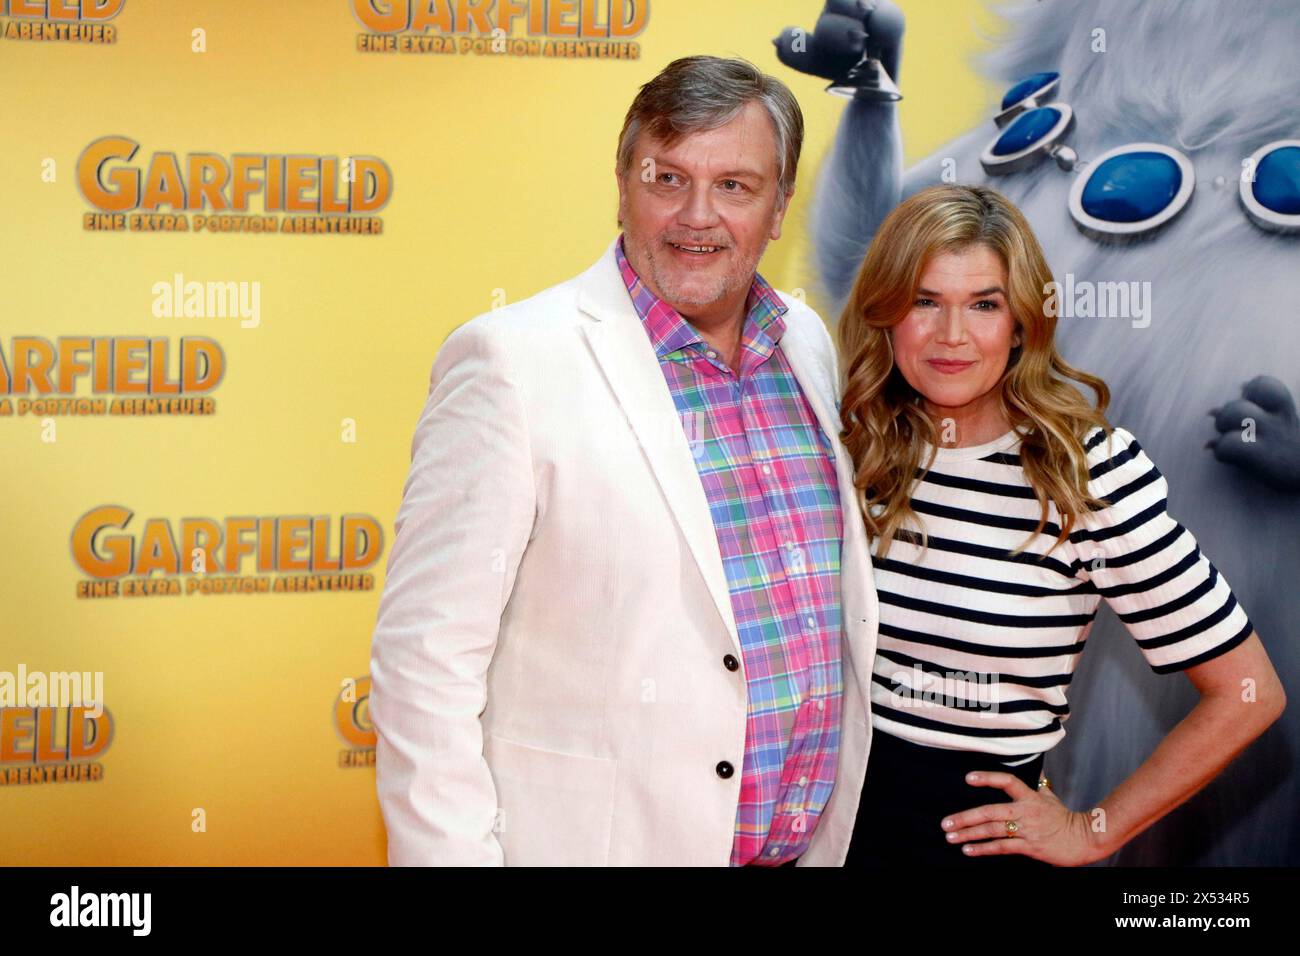 Hape Kerkeling and Anke Engelke at the German premiere of the film GARFIELD - EINE EXTRA PORTION ABENTEUER at the cinema in the Kulturbrauerei on 5 Stock Photo